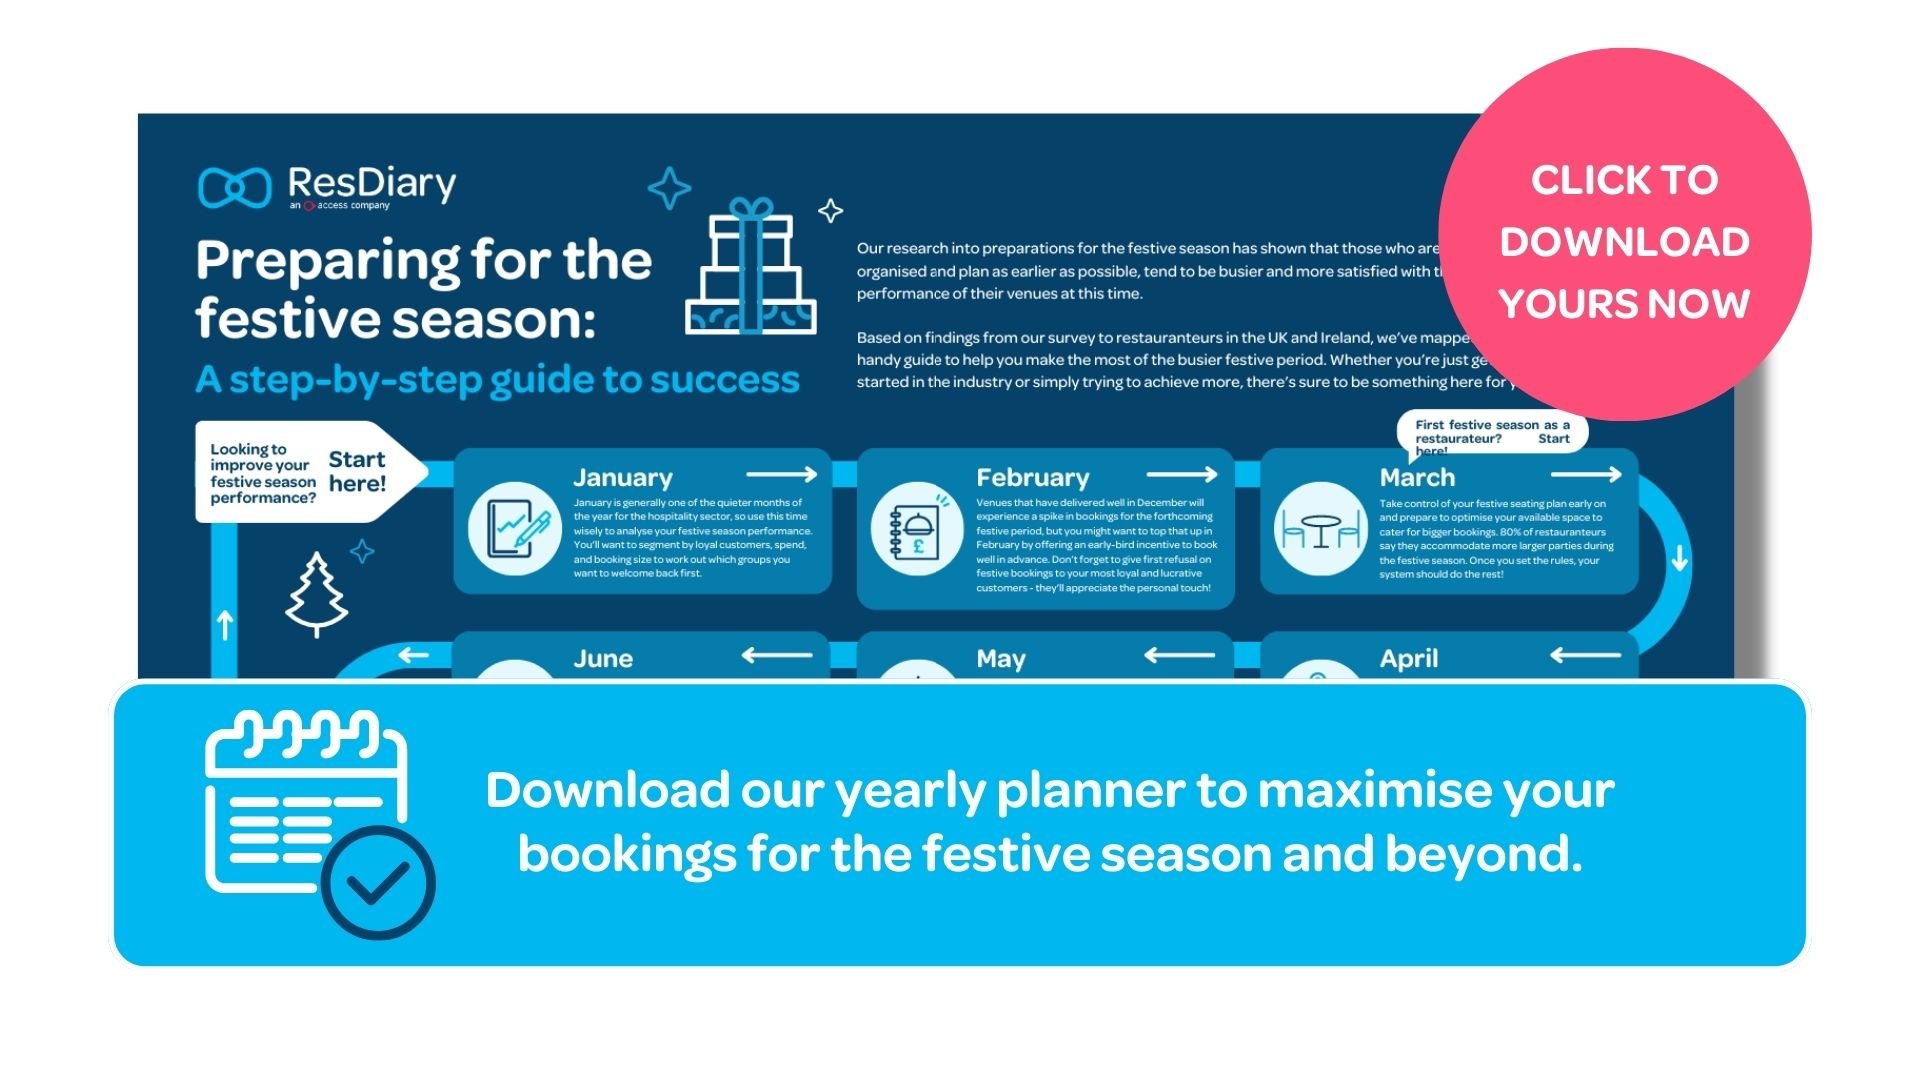 Download our yearly planner to maximise your bookings for the festive season and beyond.